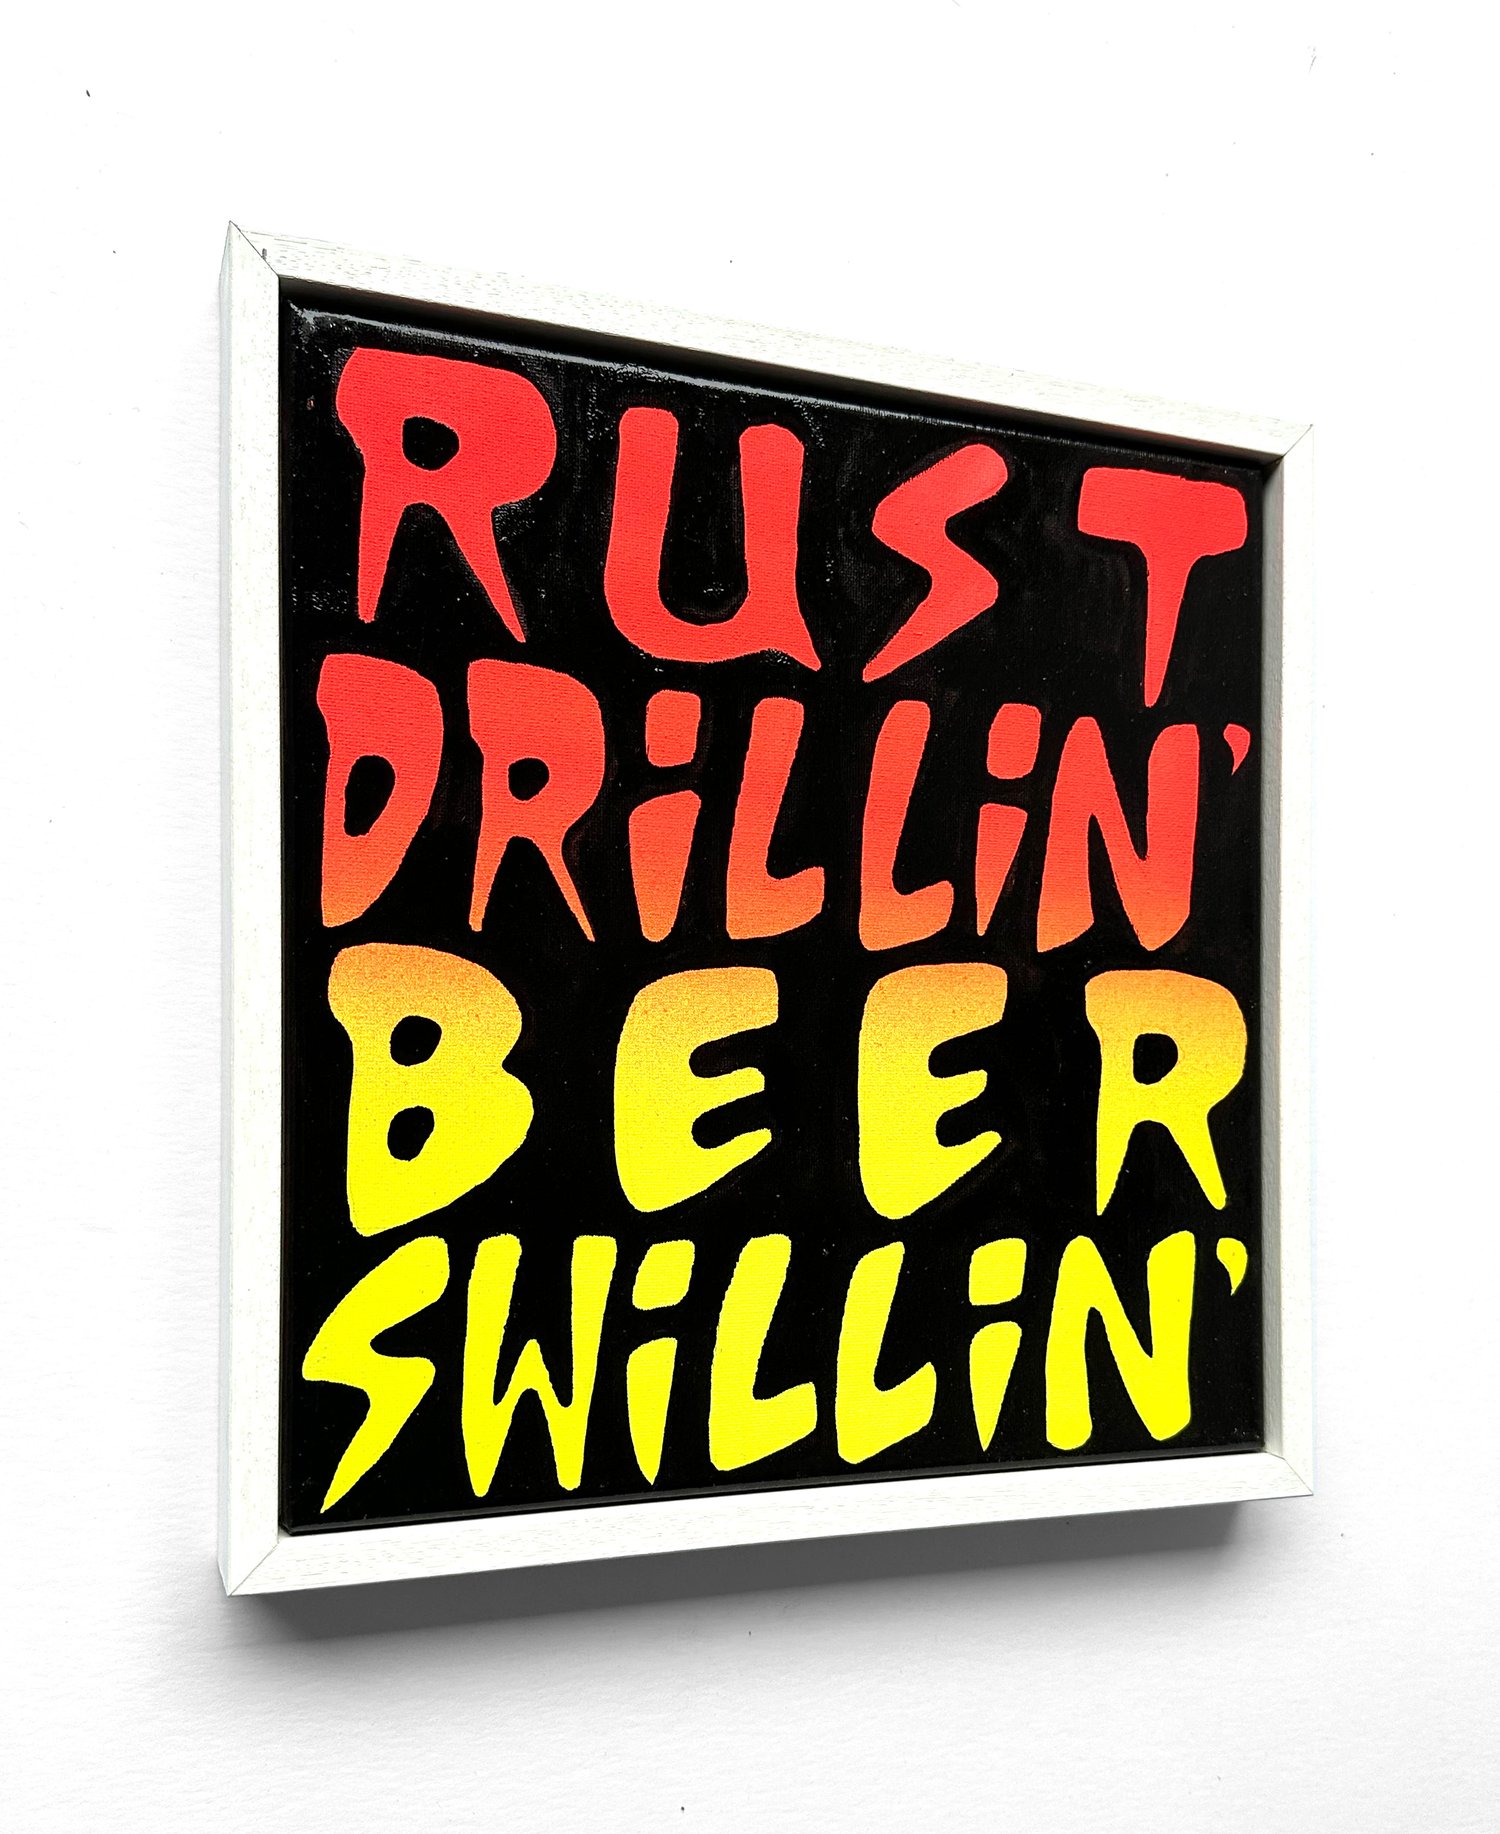 Image of ‘Rust Drillin’ by EDWIN